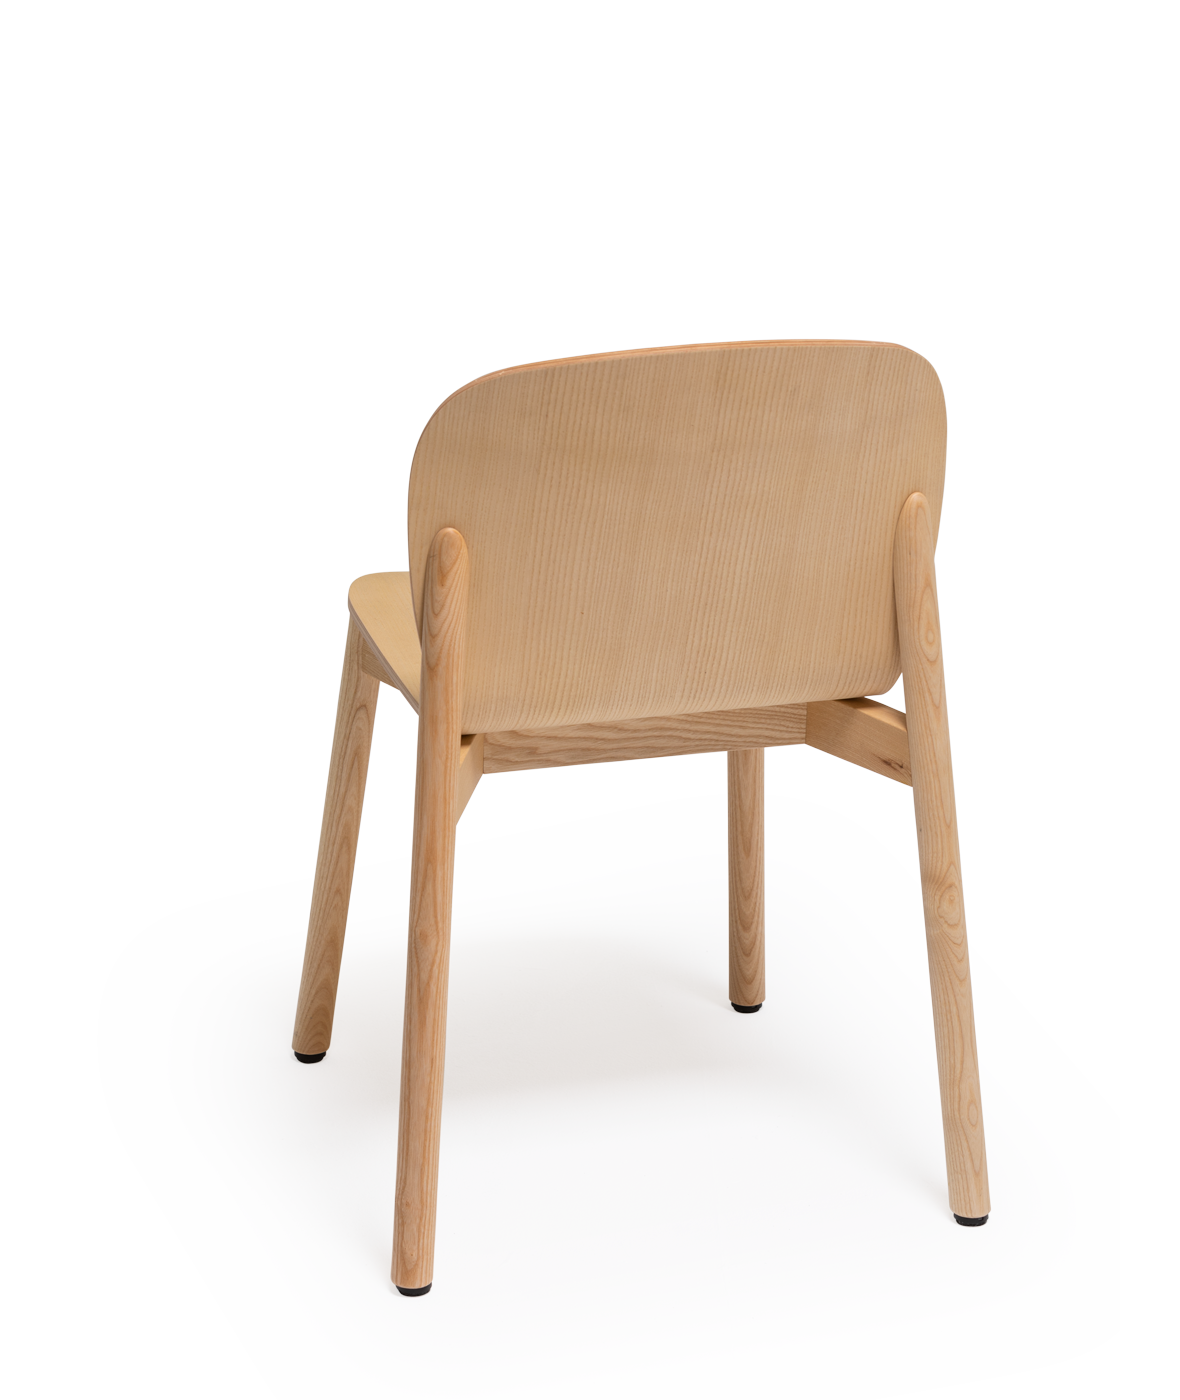 Vergés - Ona chair with wooden legs